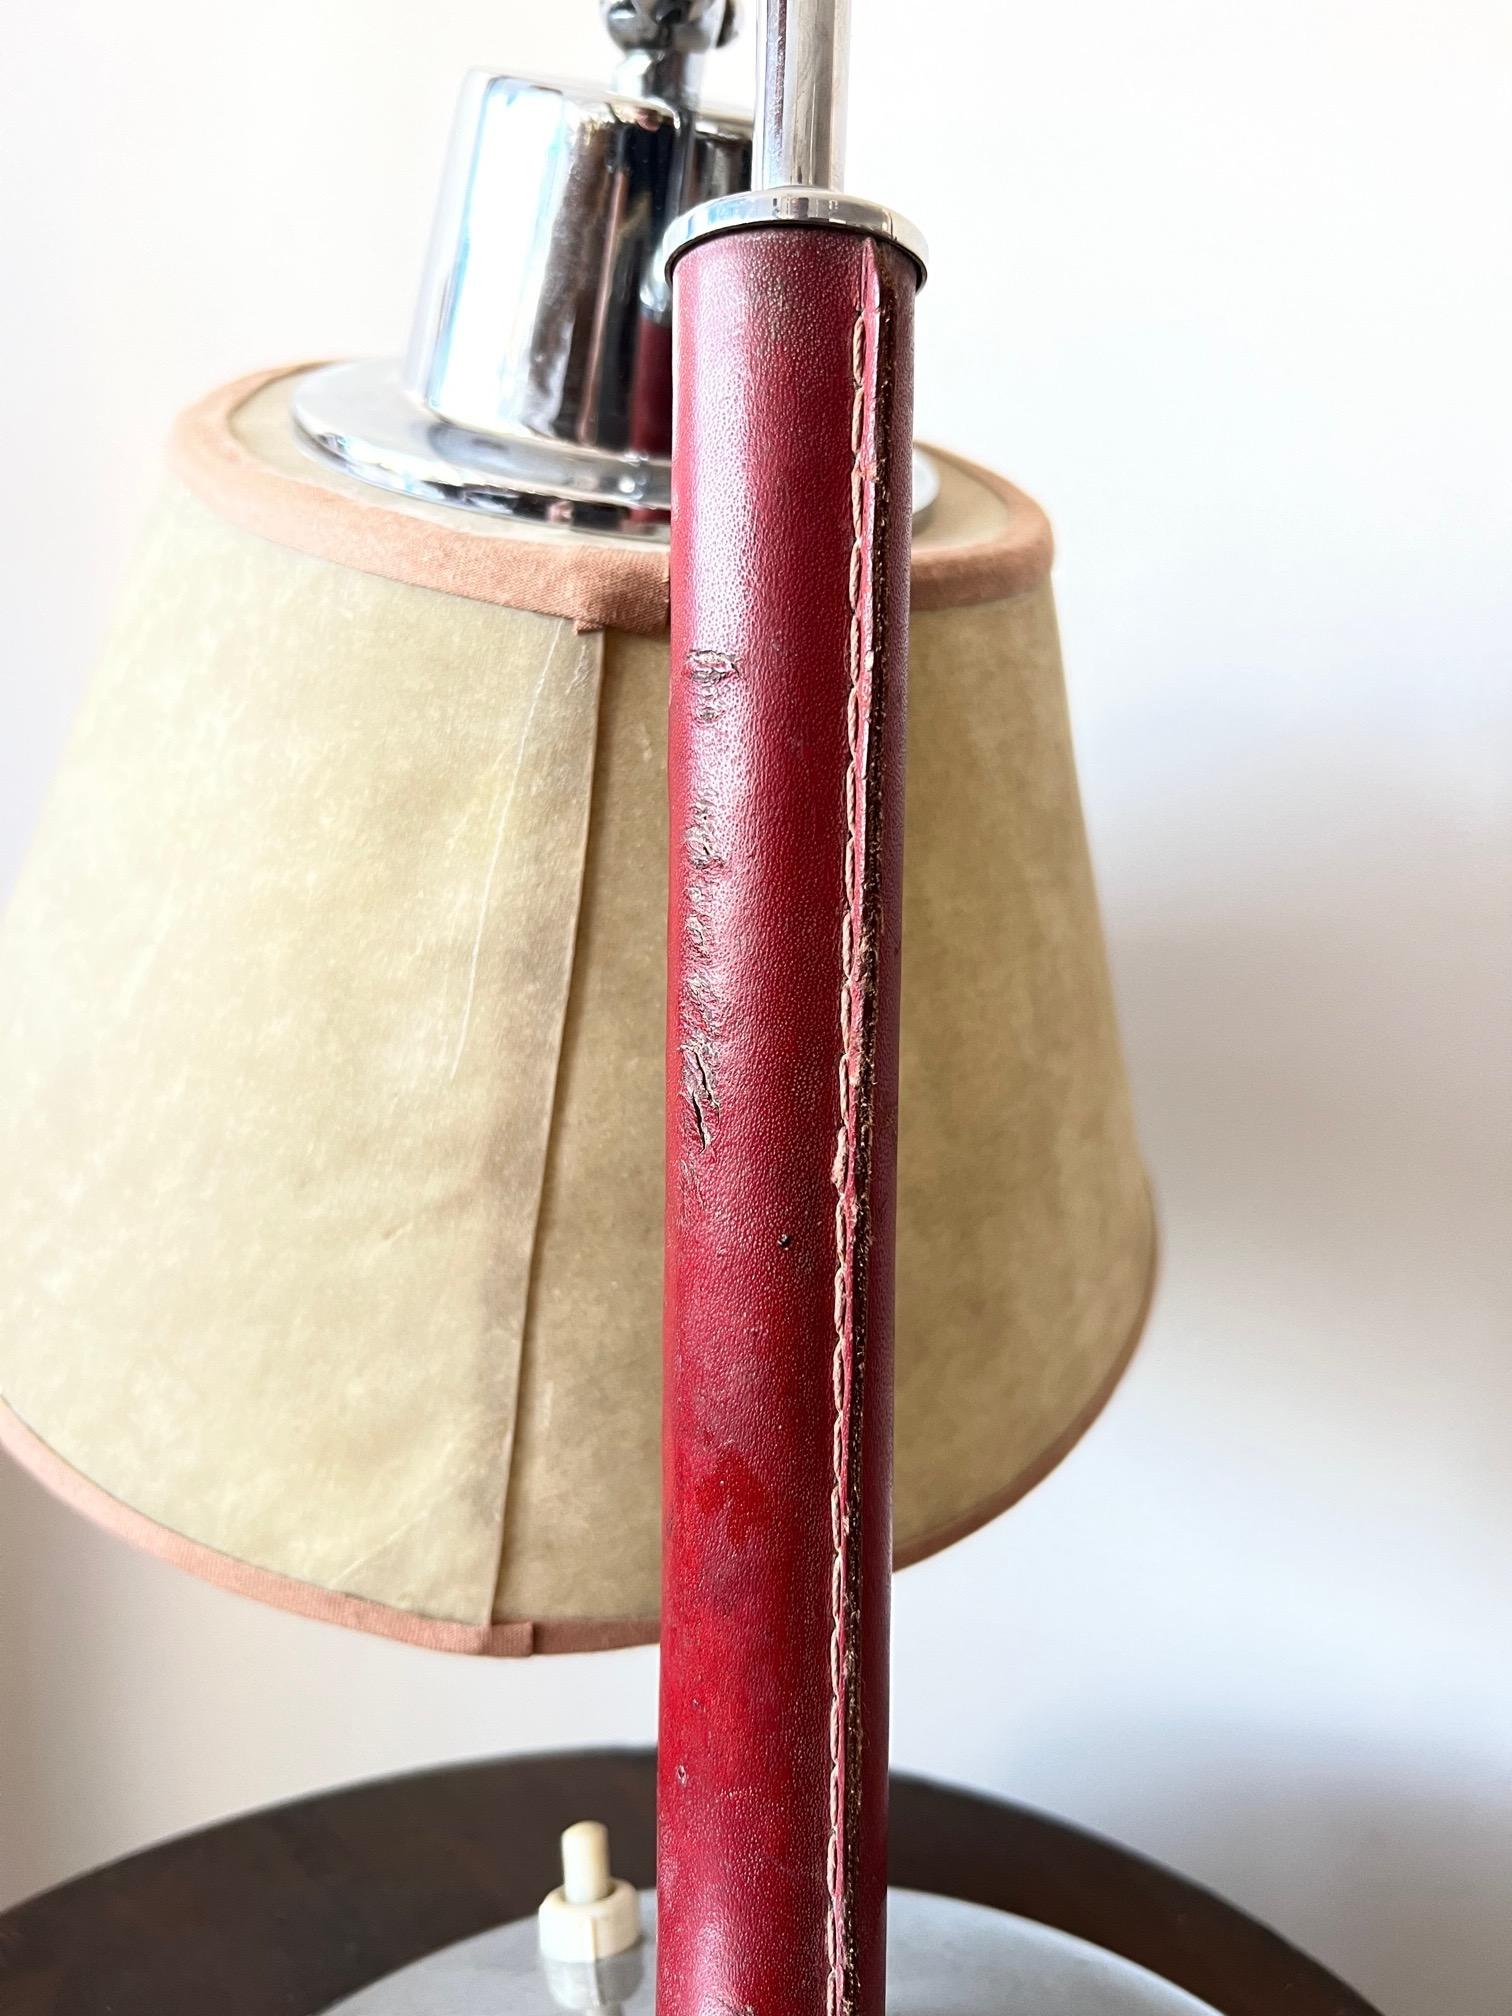 Mid-20th Century Elegant Desk Lamp in Red Leather and Parchment Shade For Sale